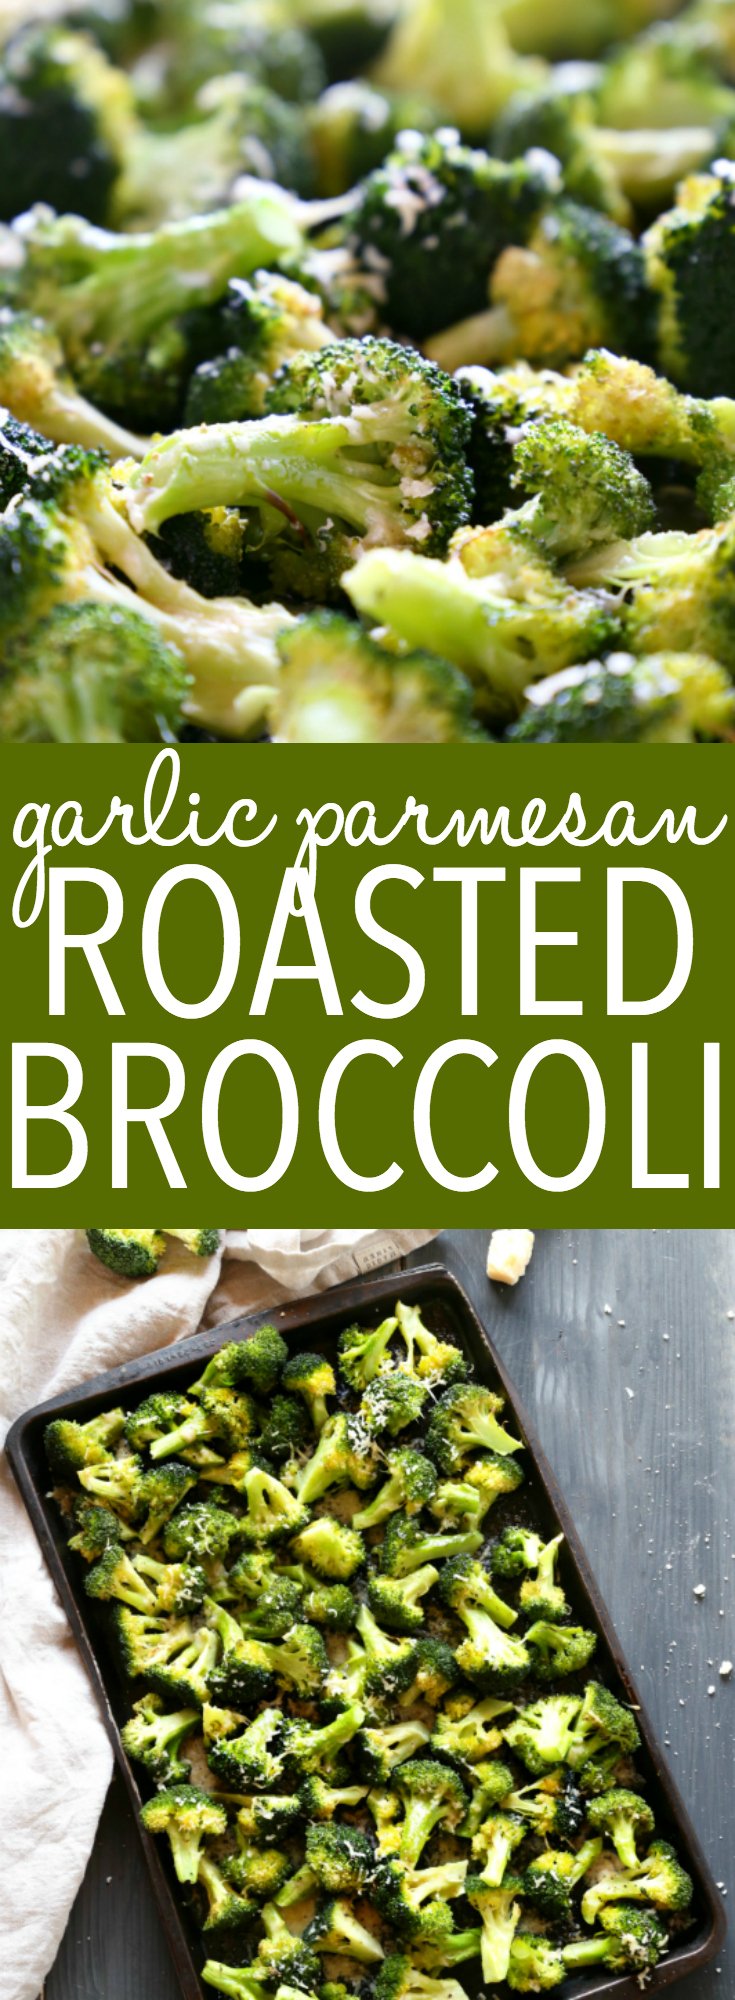 This Garlic Parmesan Roasted Broccoli is a quick and easy side dish that's healthy and delicious, and made with only 4 simple ingredients! It's a family favourite recipe that's the perfect holiday side dish, but it's delicious any time of the year! Recipe from thebusybaker.ca! #sidedish #roastedbroccoli #garlicparmesanbroccoli #easysidedishrecipe via @busybakerblog